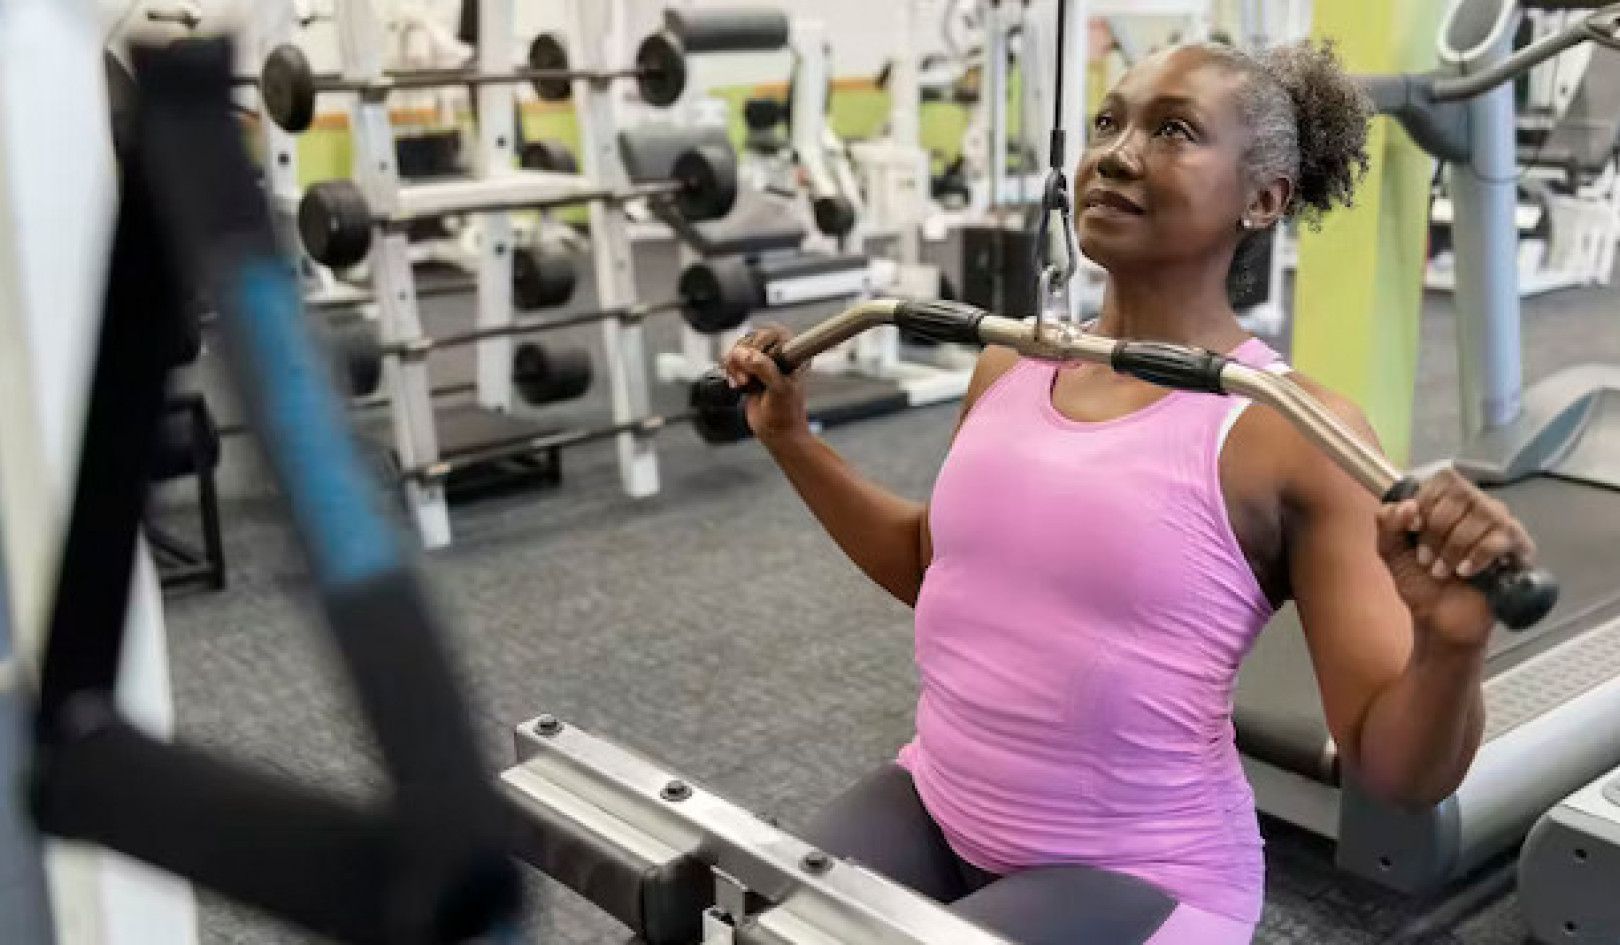 Defying Age: Strength Training's Impact on Physical Decline